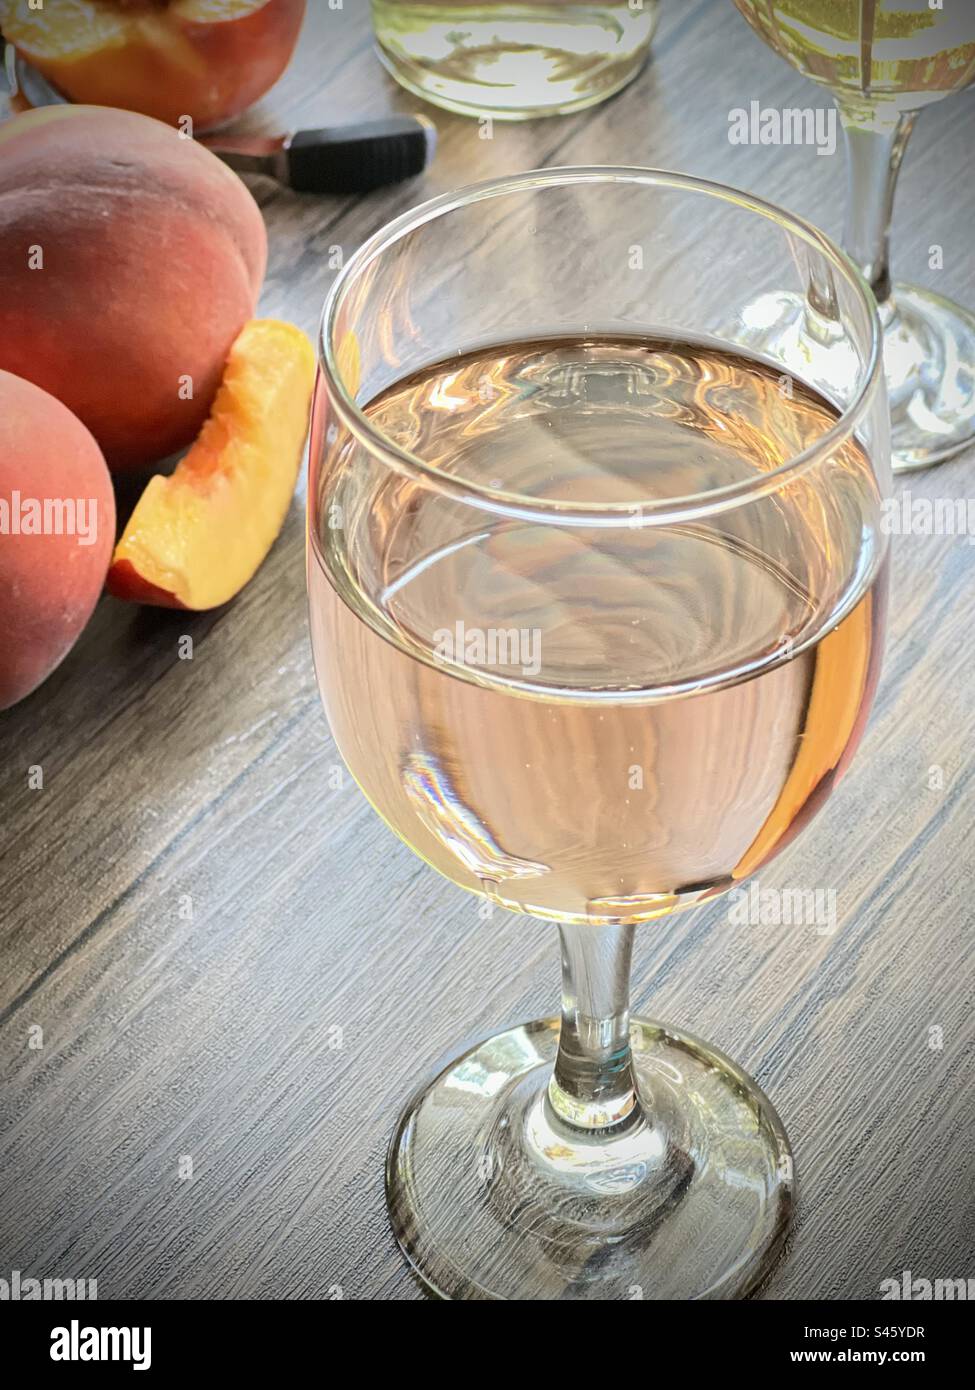 Peach wine in a clear wine glass on a wooden table Stock Photo